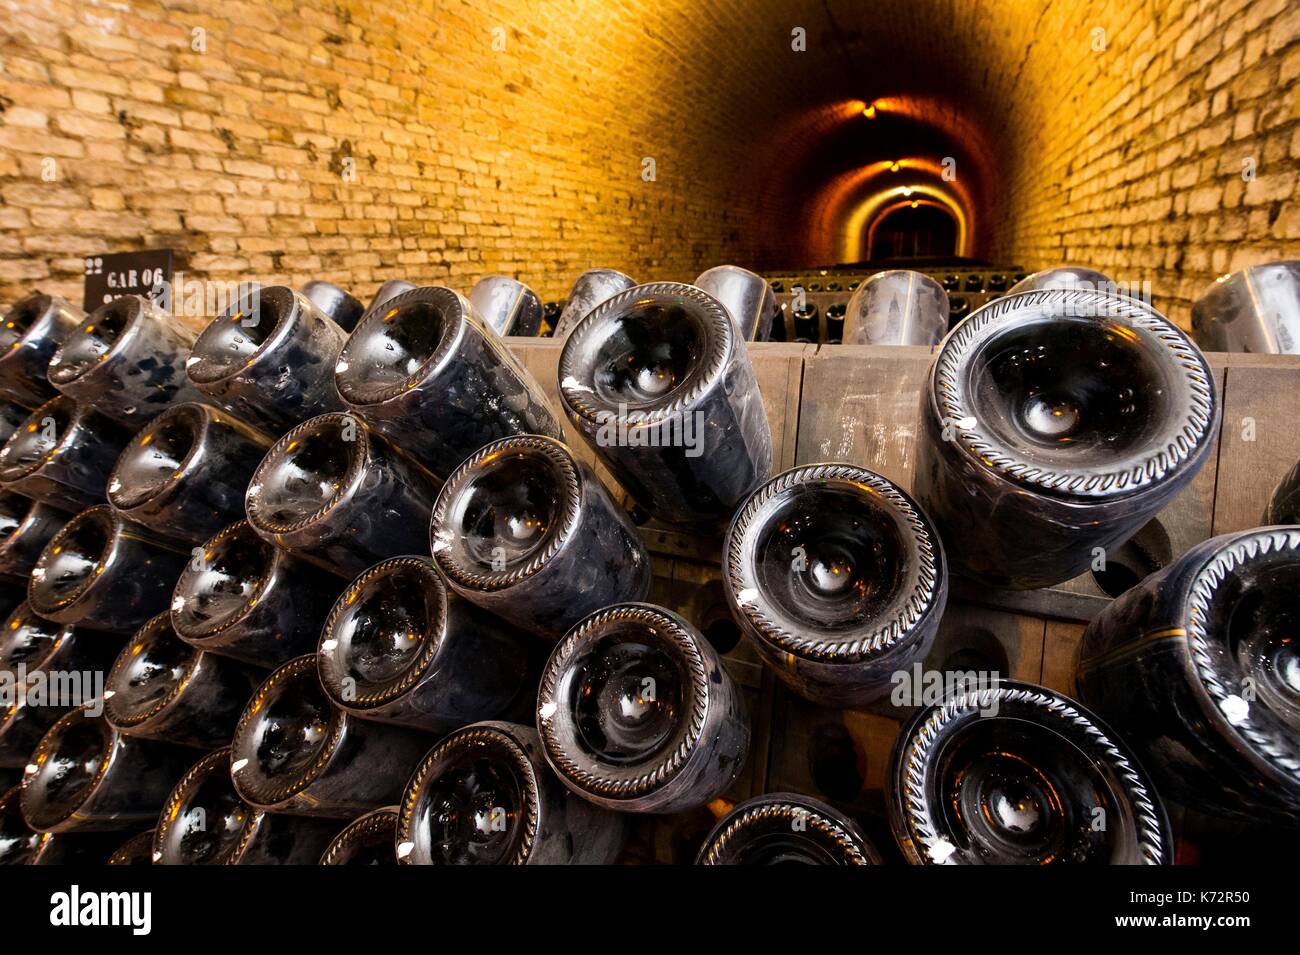 France, Marne, Ay, bottles and cave of Bollinger champagne Stock Photo